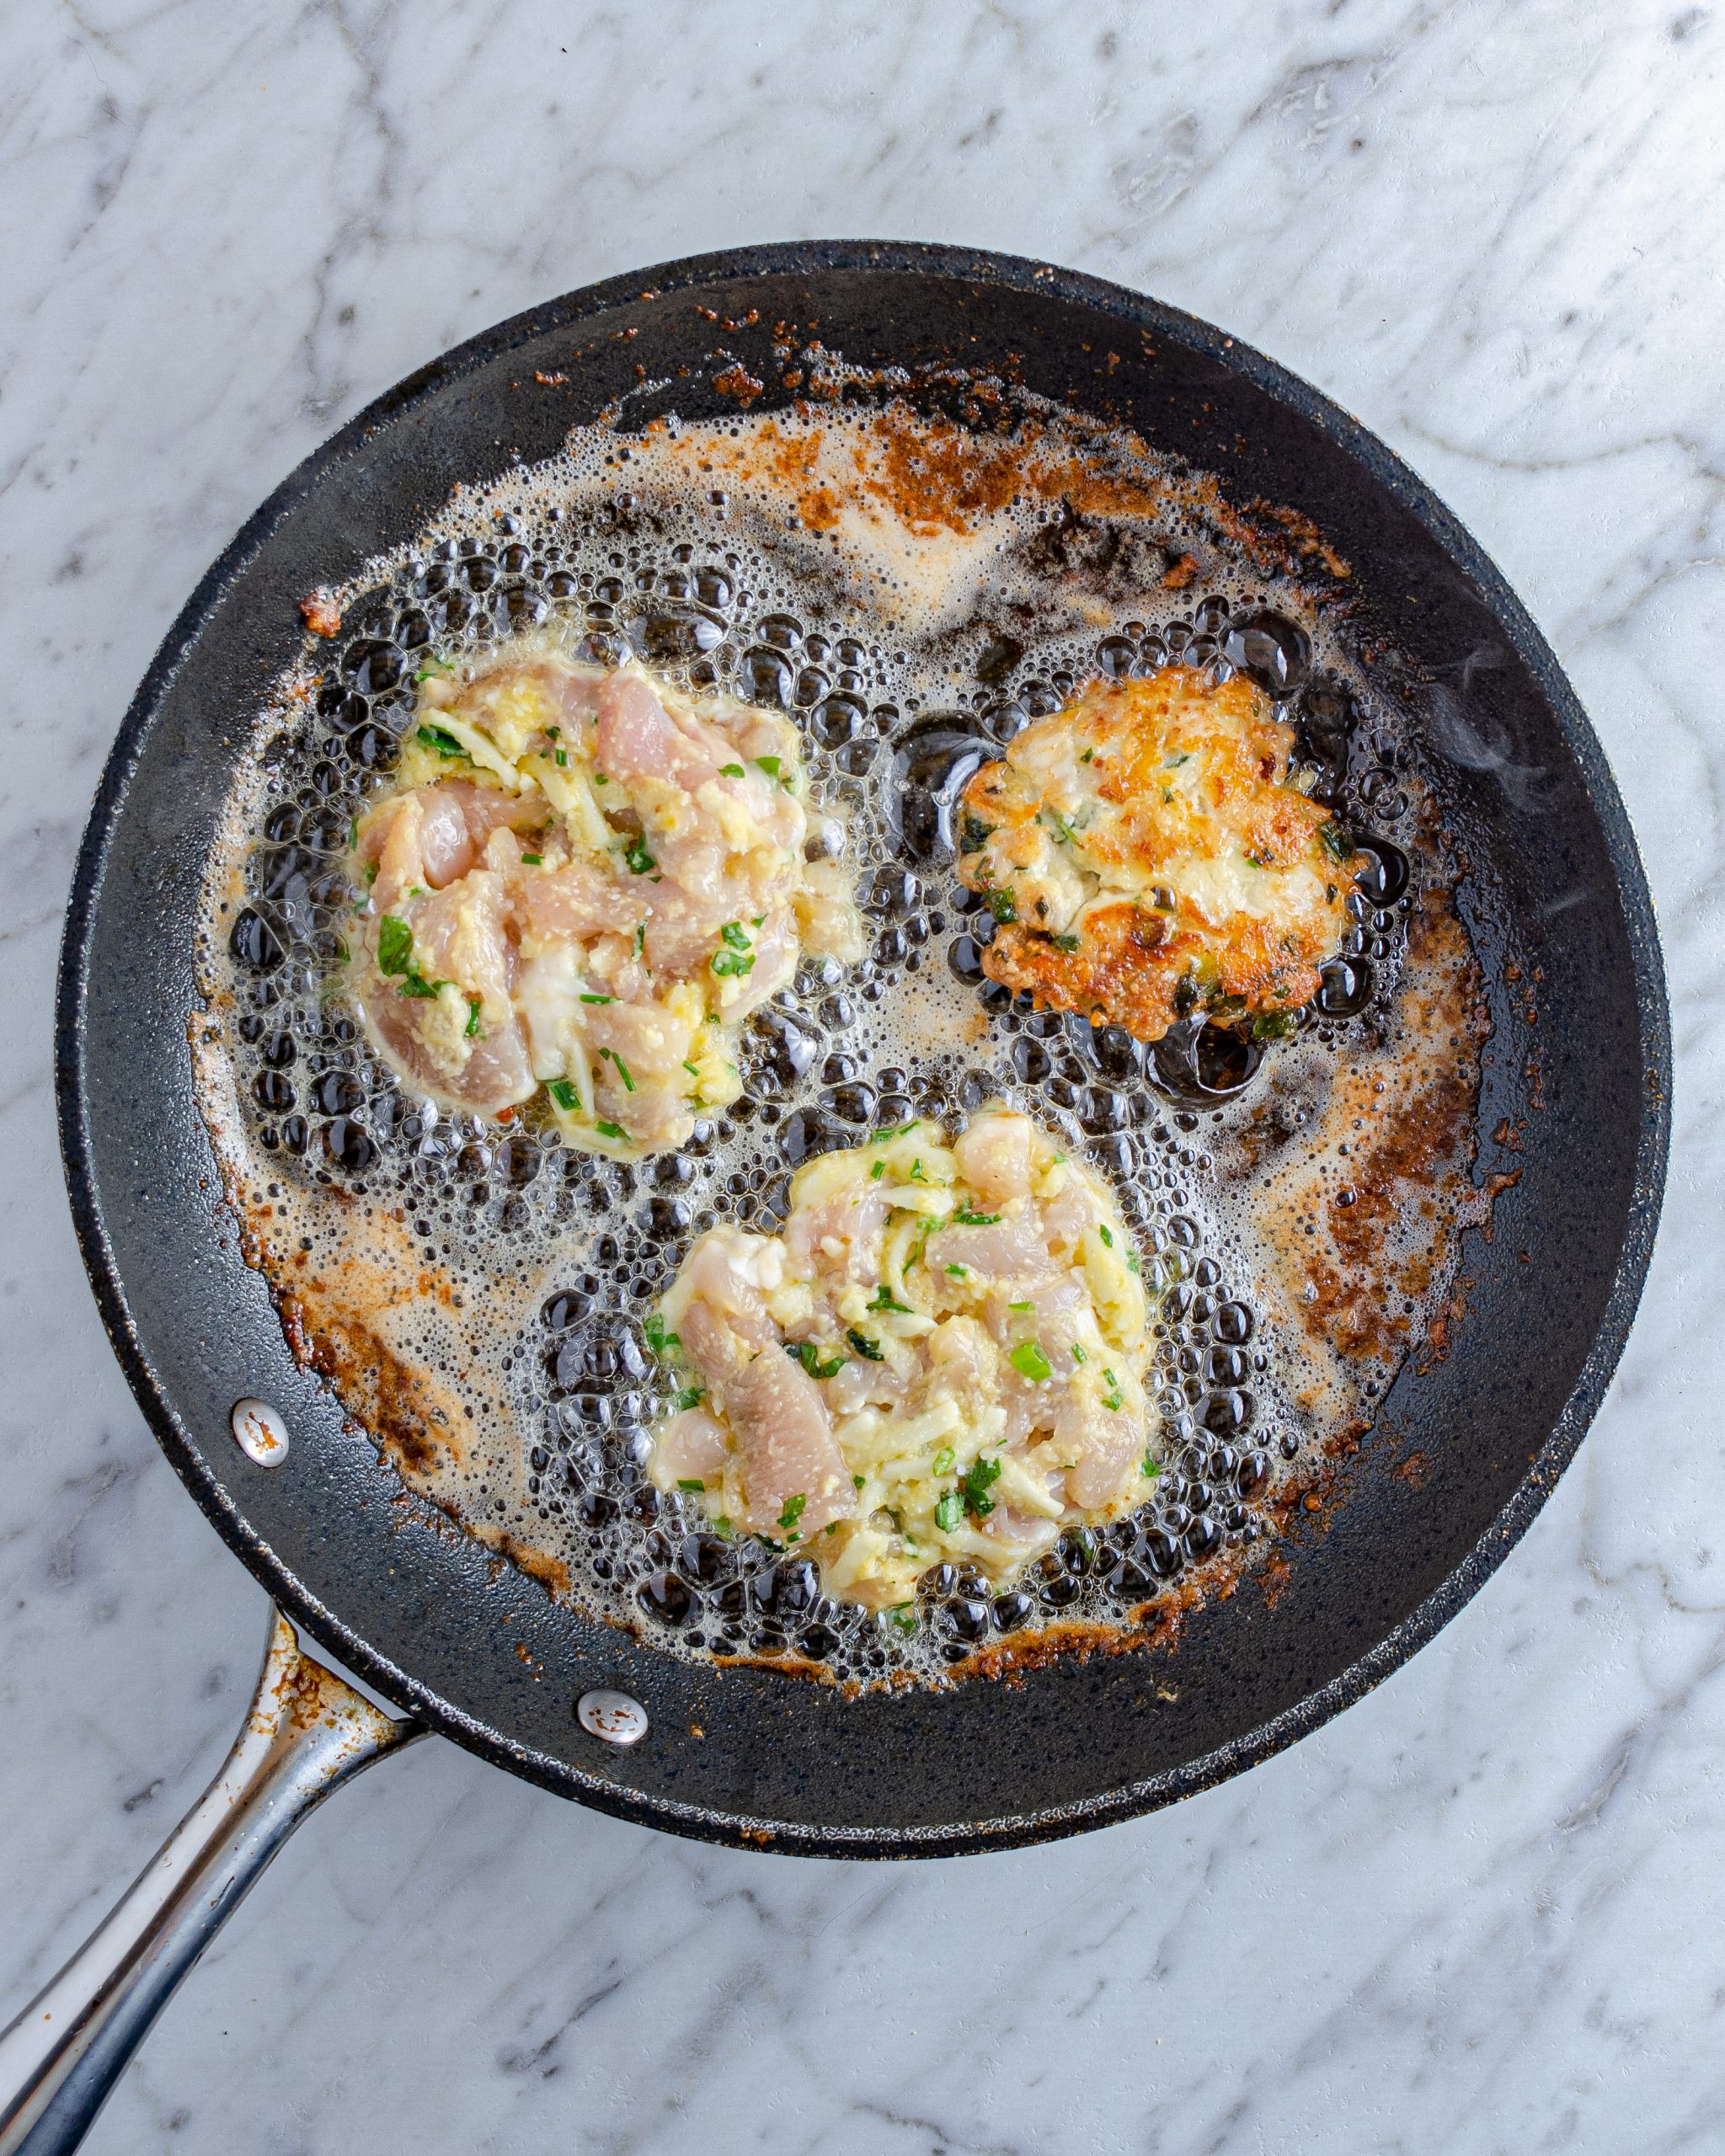 Drop spoonfuls of the chicken mixture into the skillet, and flatten slightly with a spatula. Fry evenly on both sides until golden brown, and until the chicken is cooked through